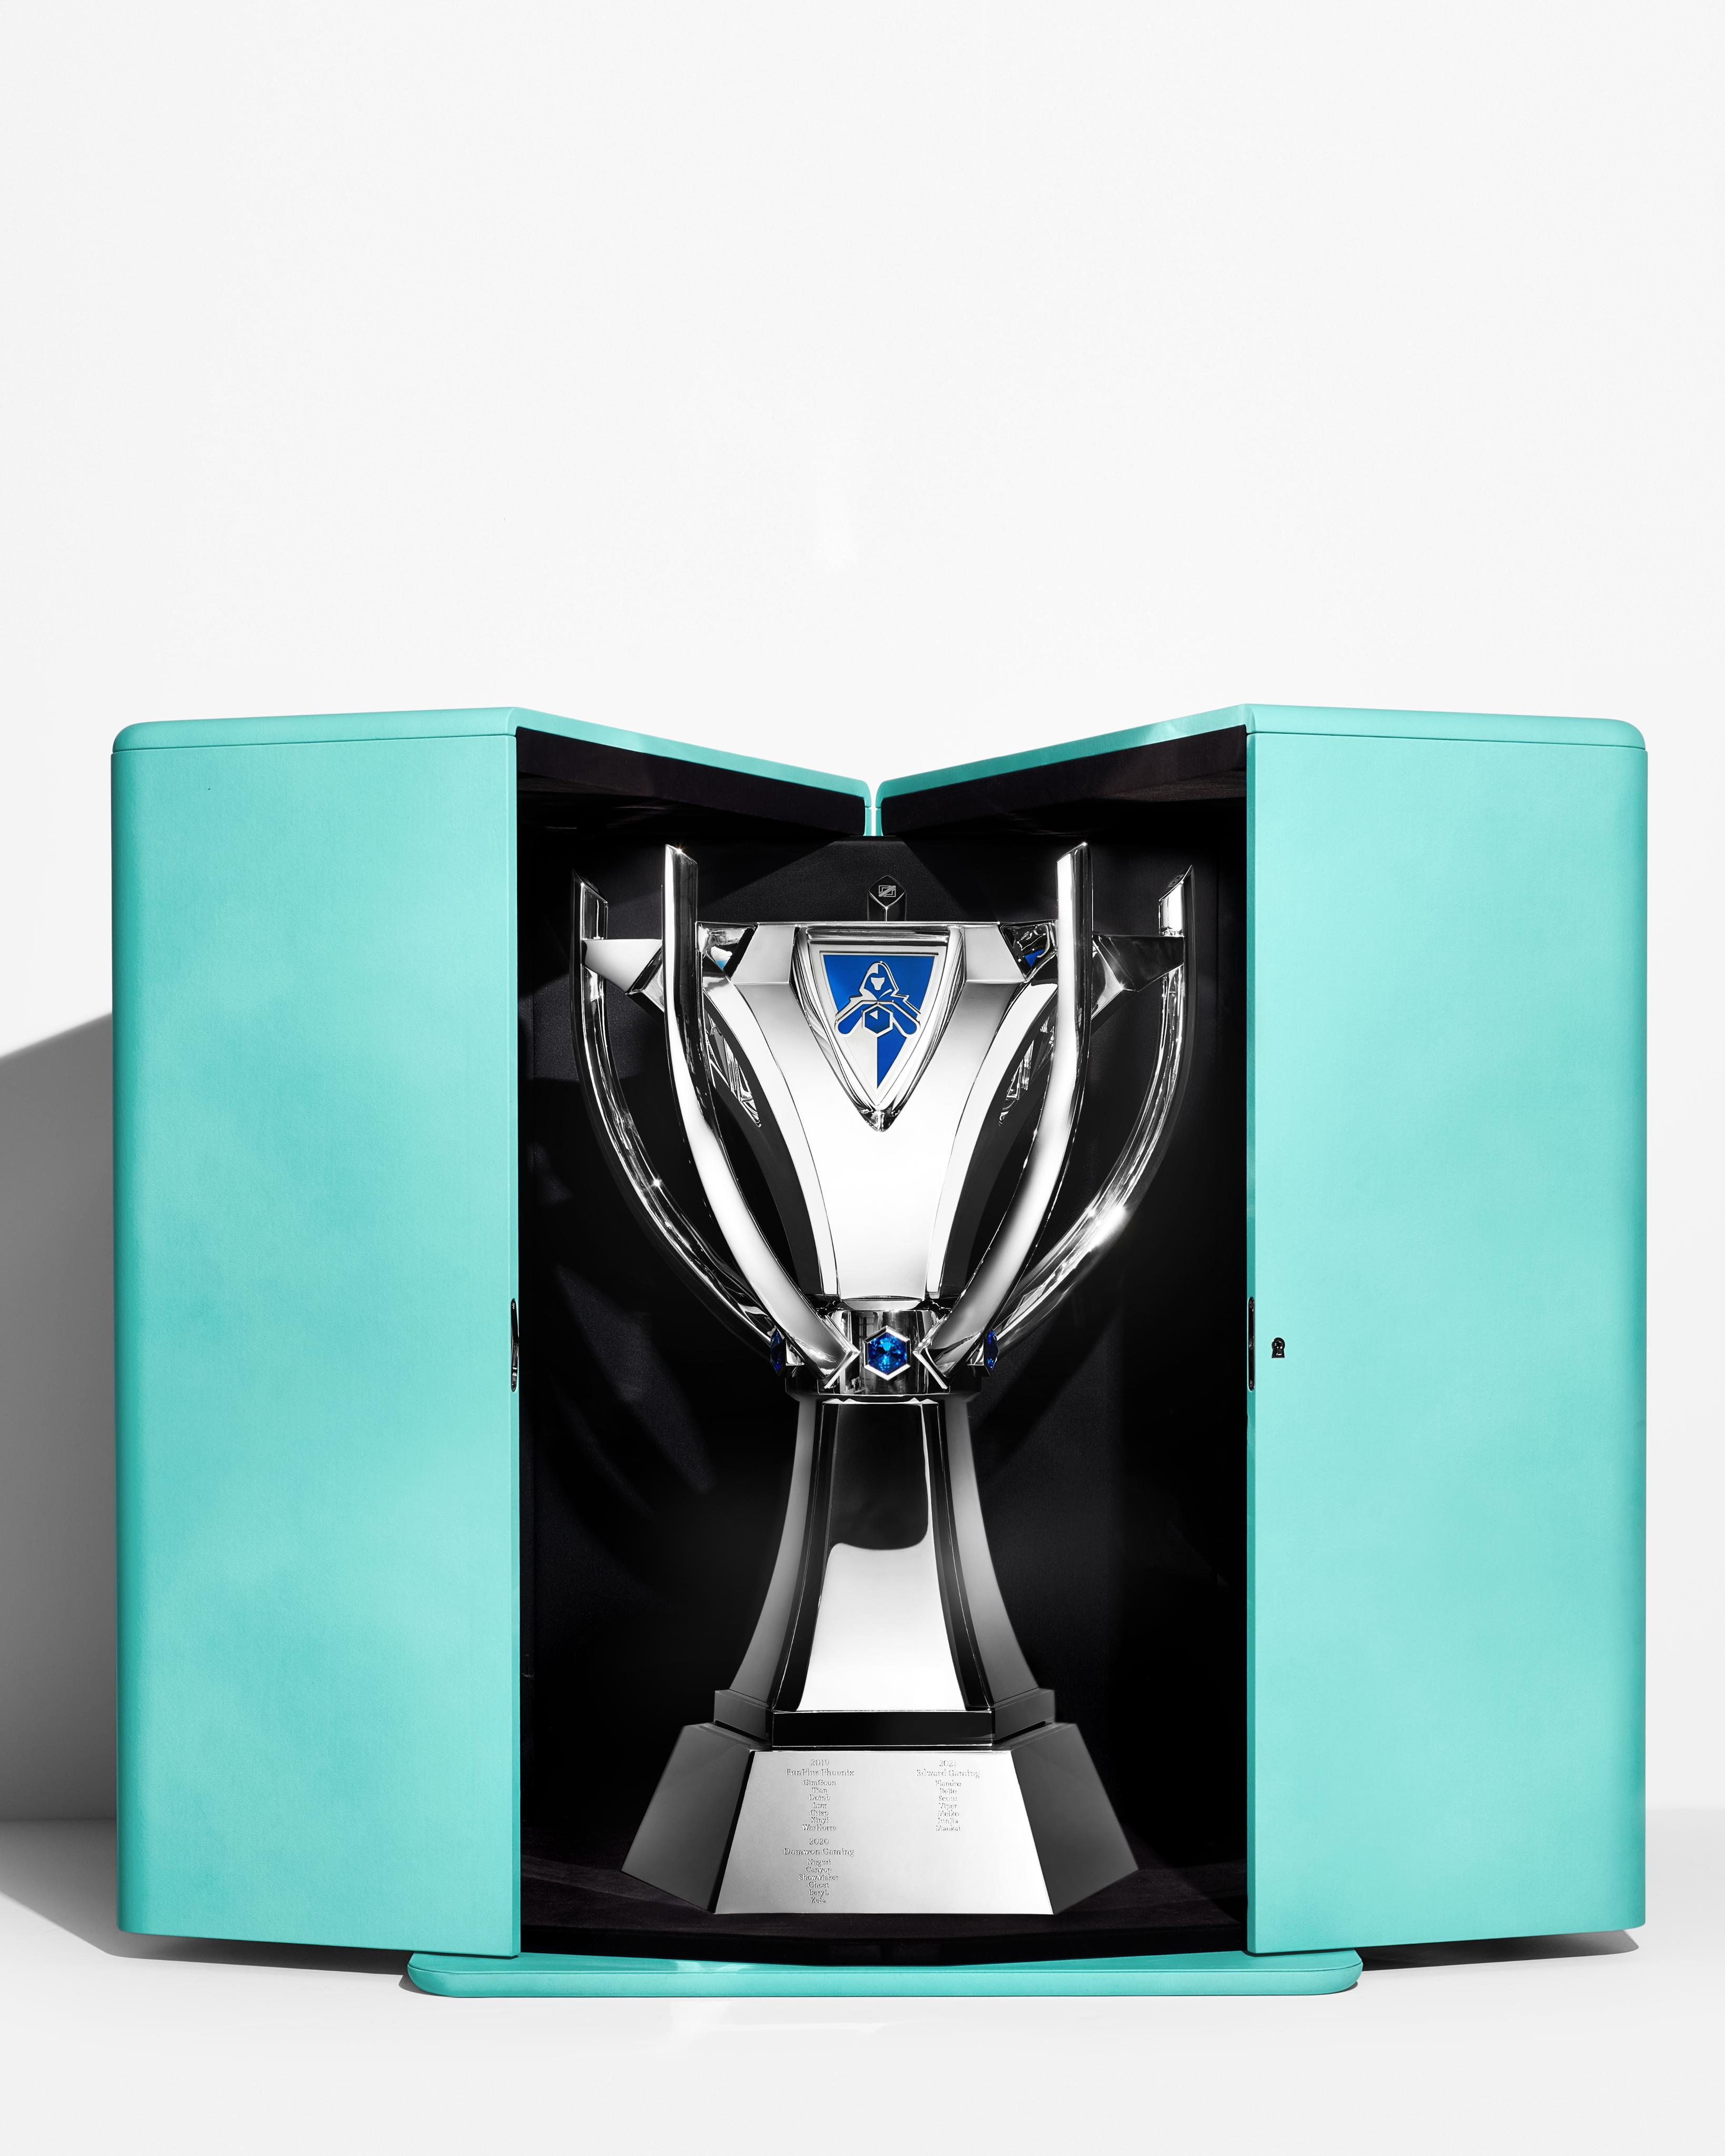 League of Legends' most coveted trophy is now made by Tiffany - The Verge